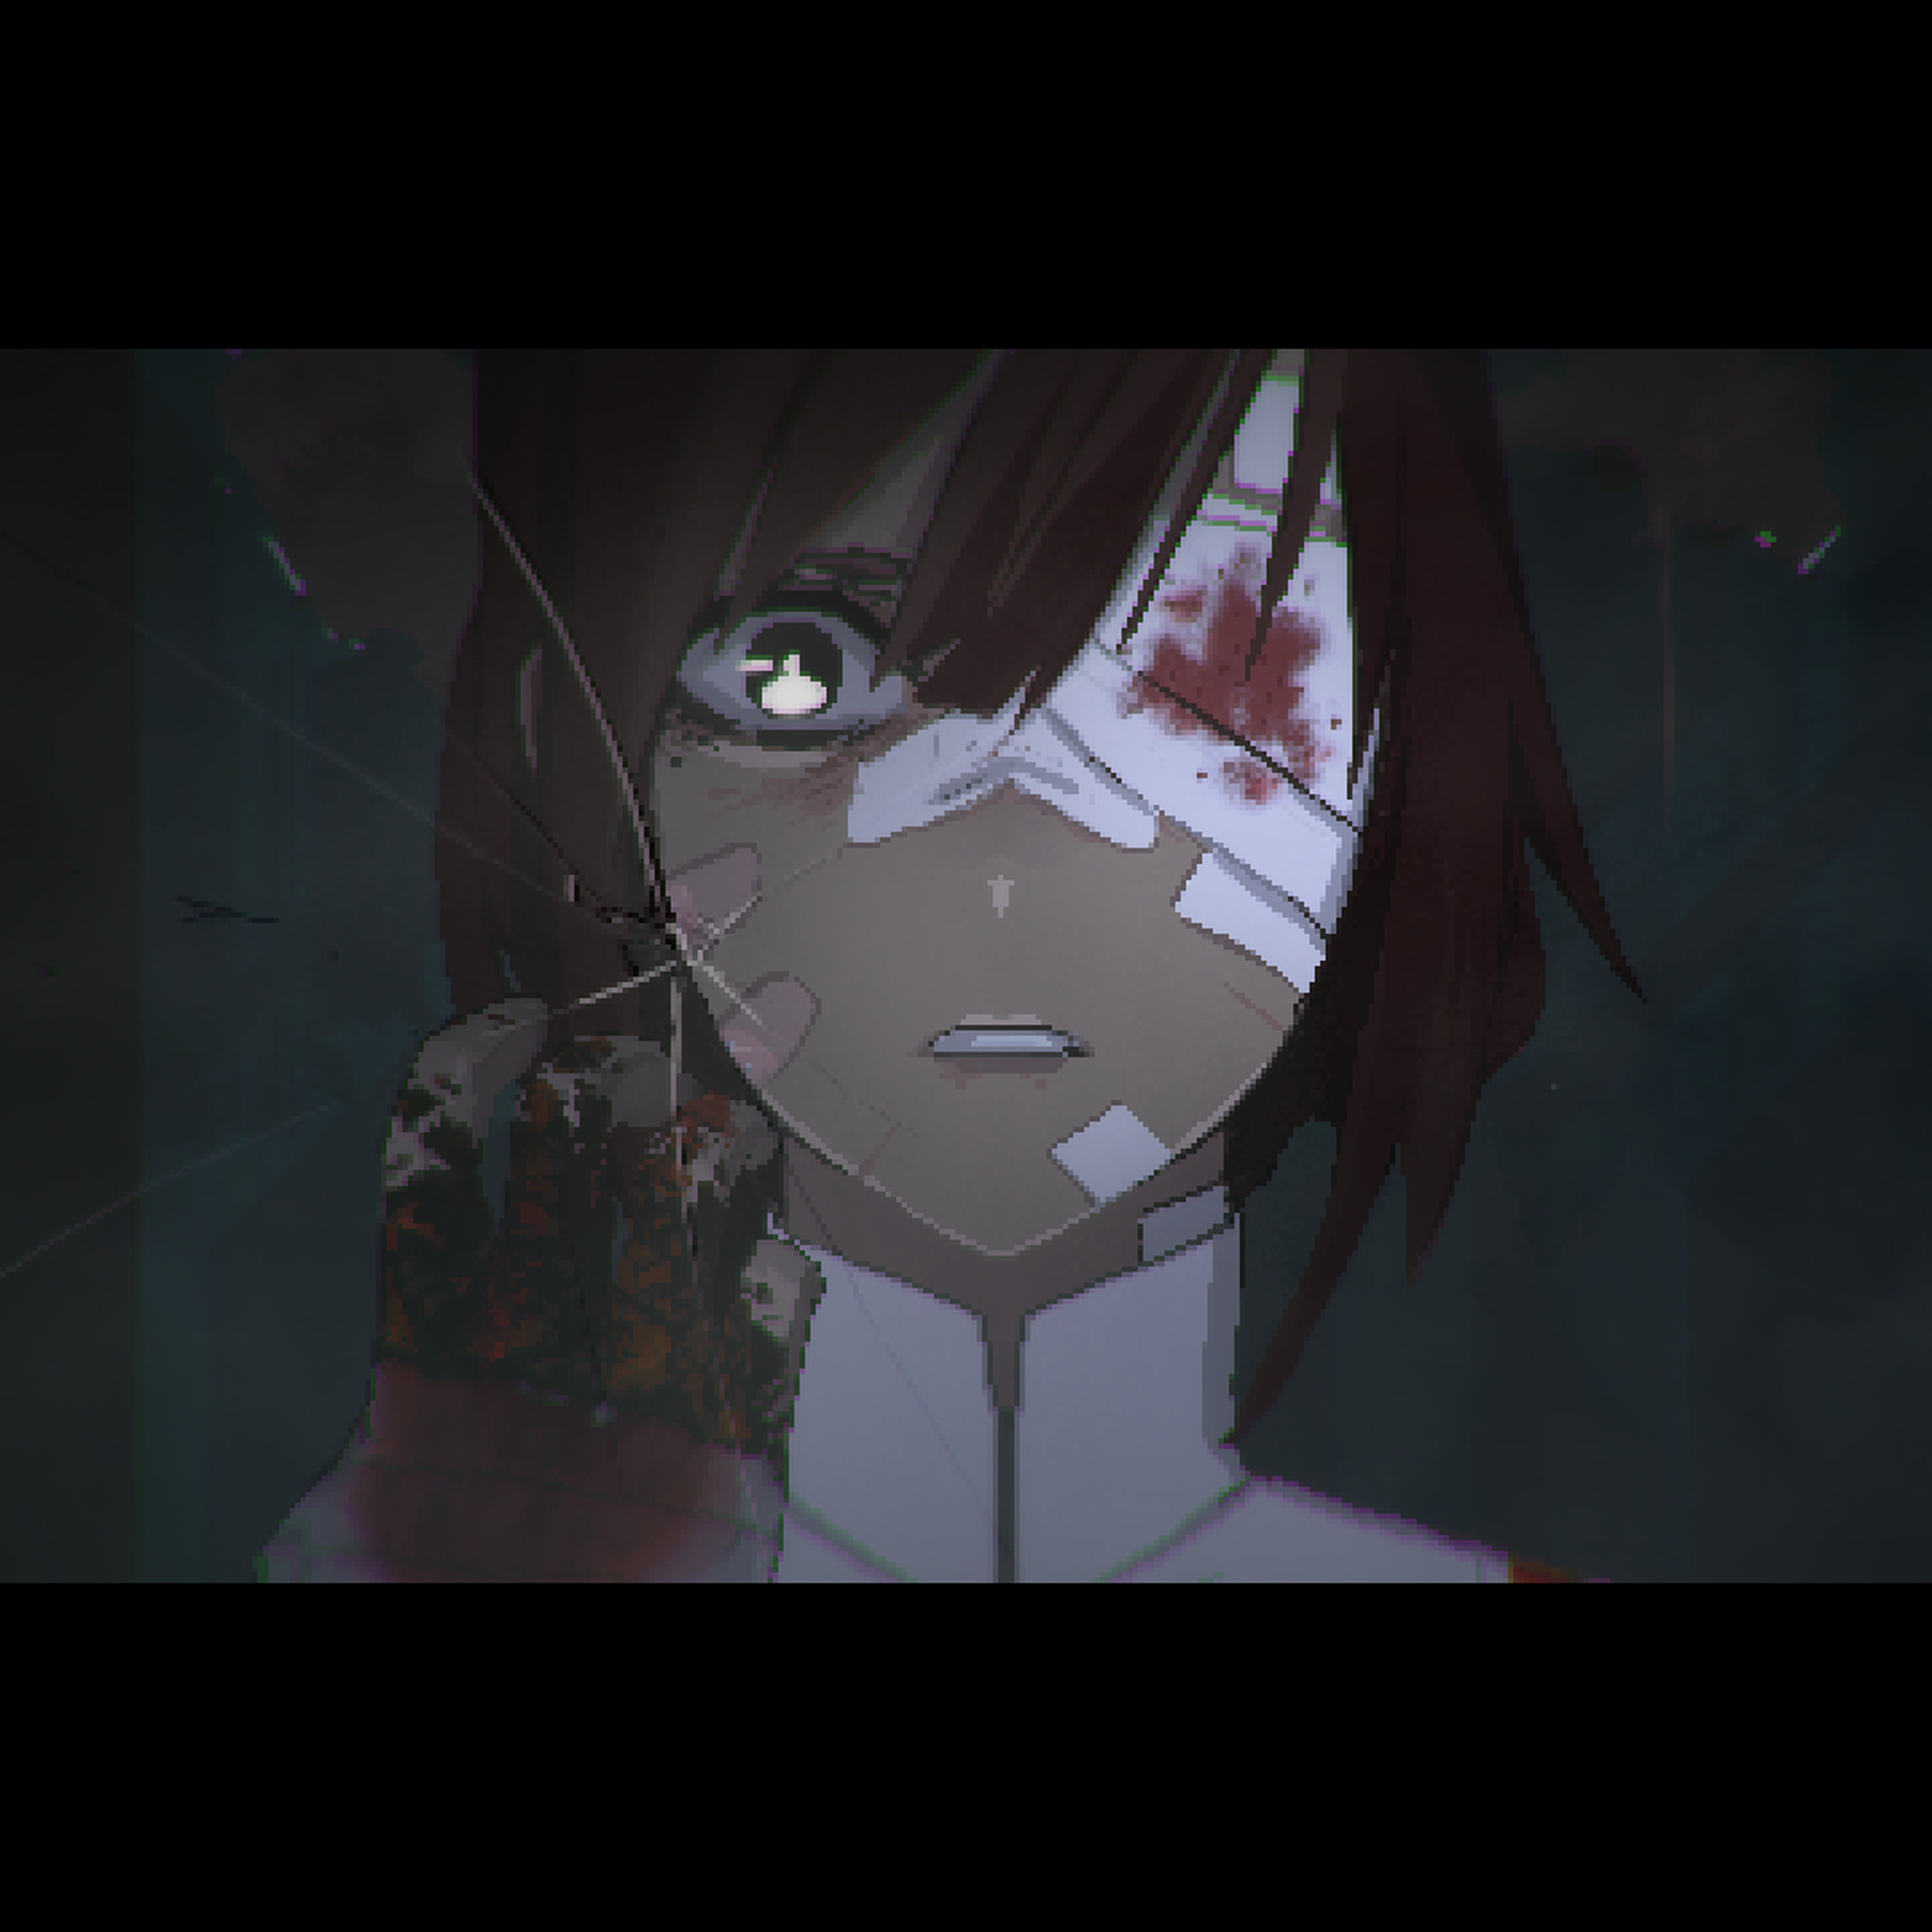 A screenshot from the horror game Signalis.